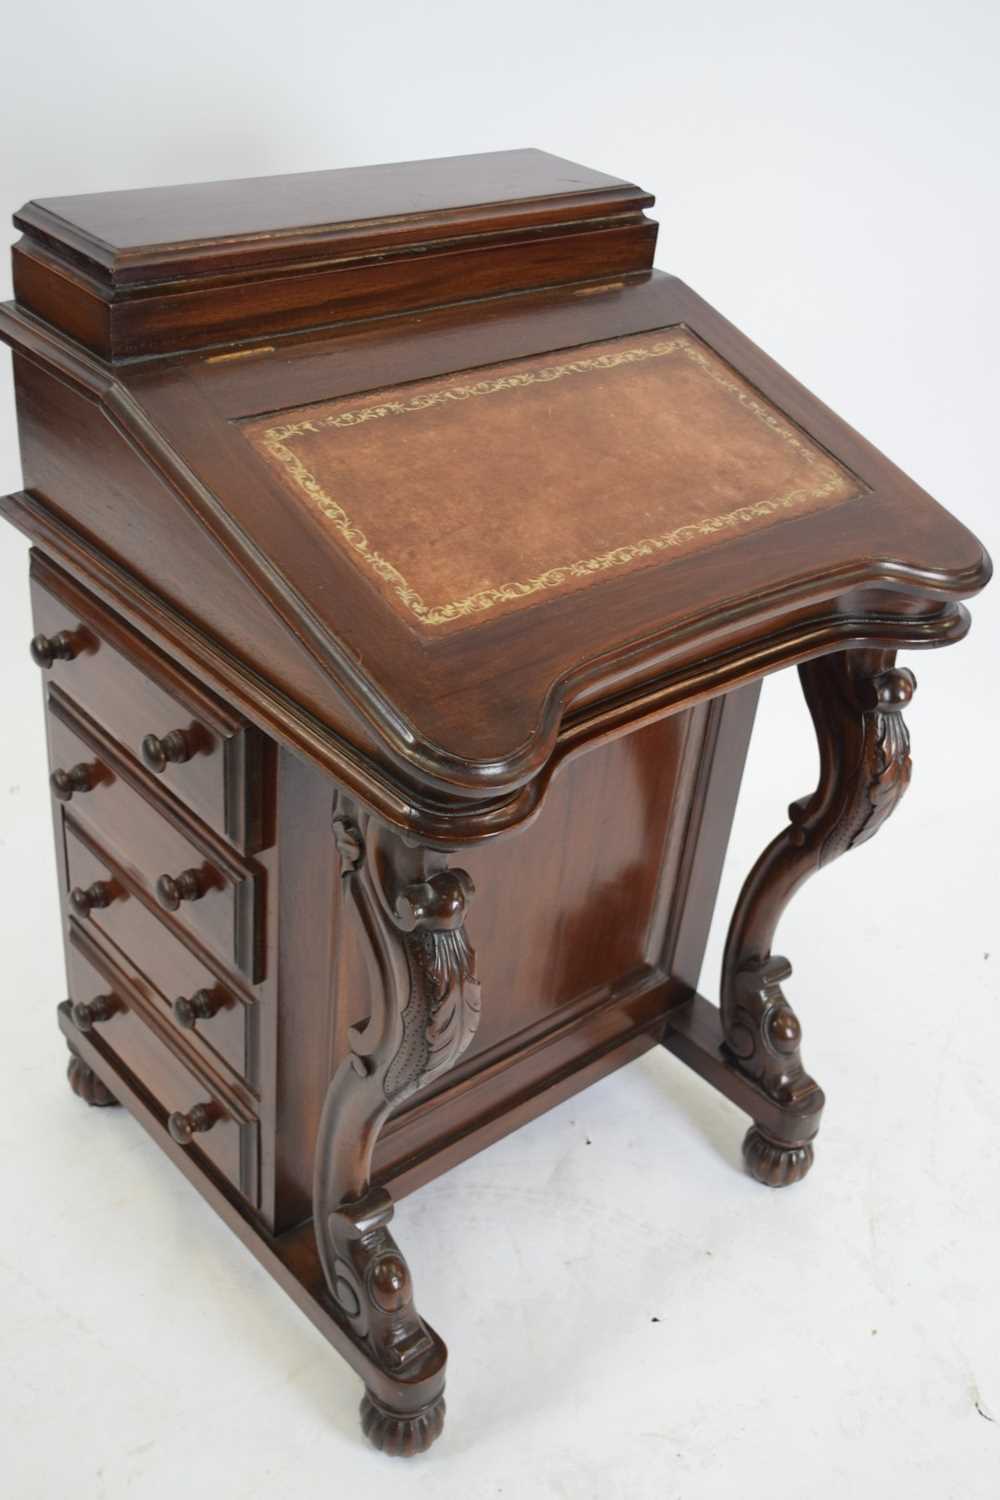 Mahogany Davenport desk, the top section with a lift up storage compartment over a sloped writing